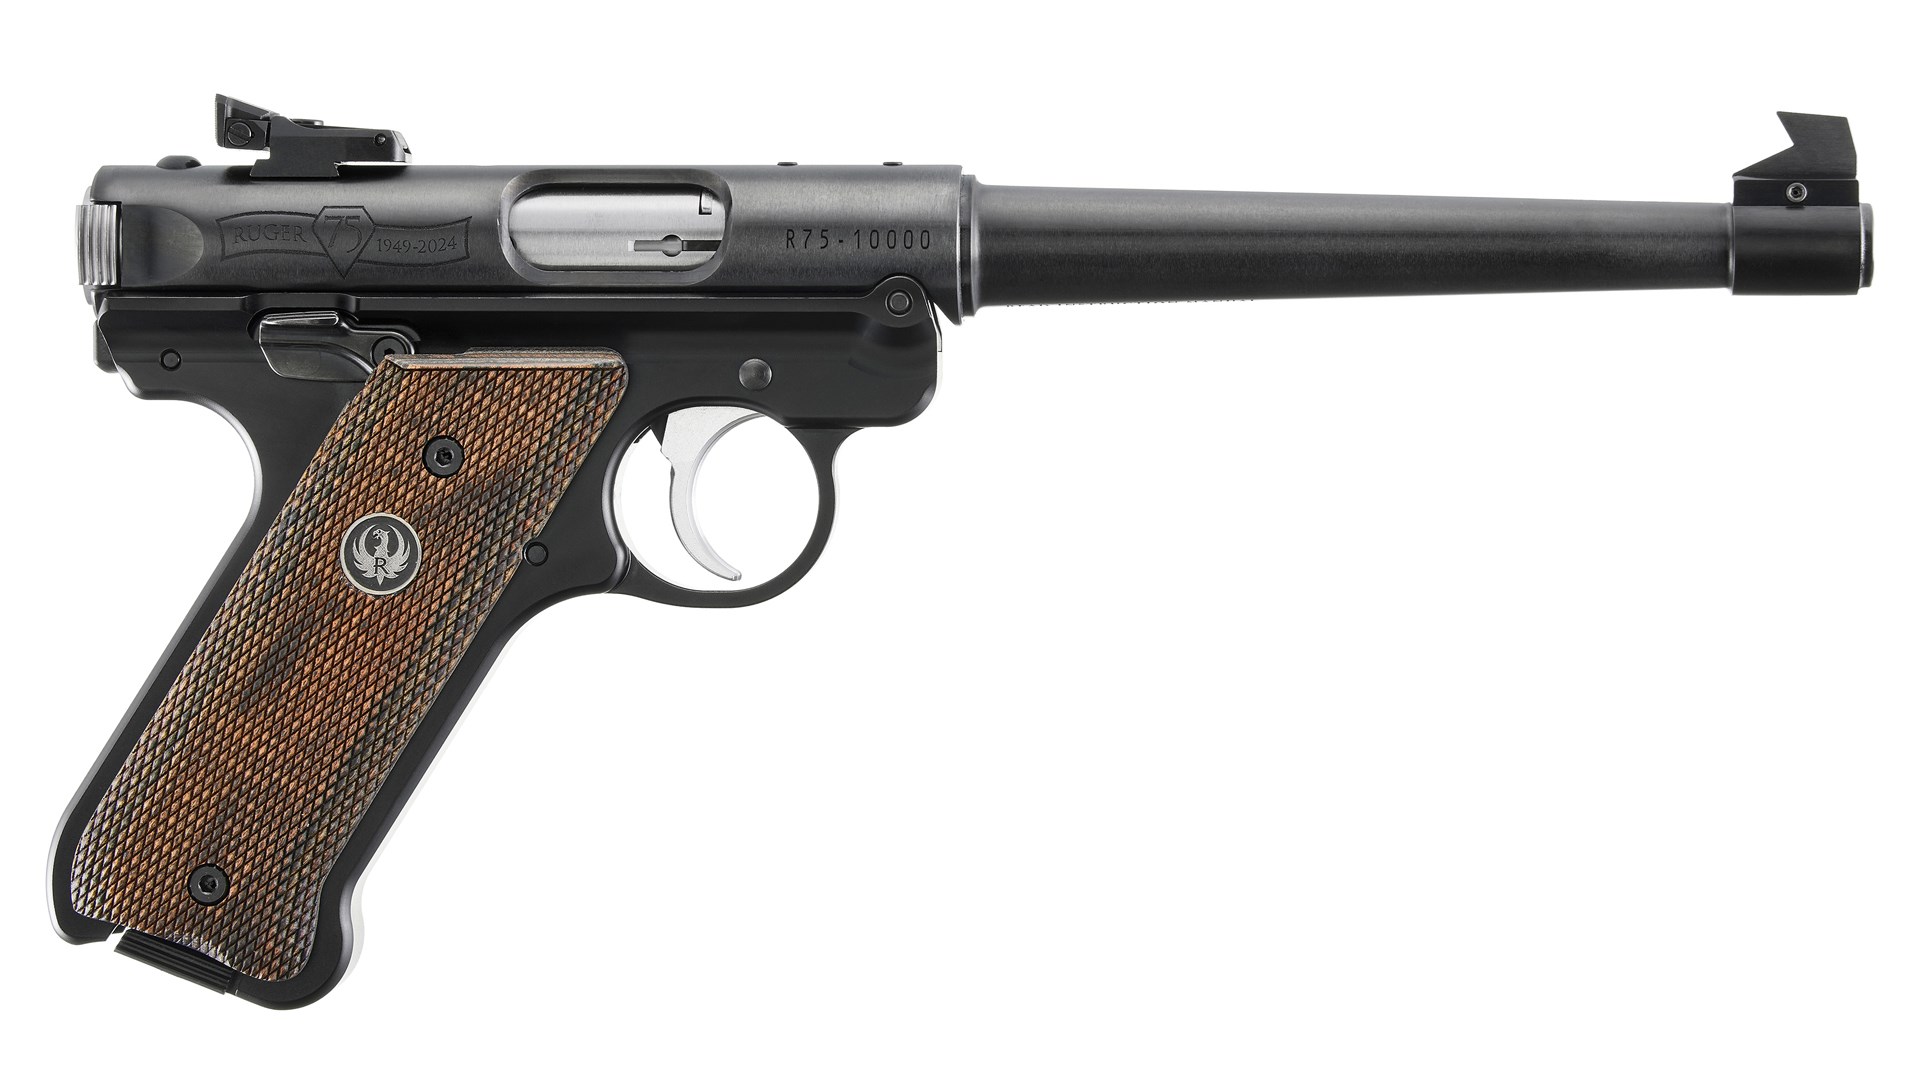 Right side of the Ruger 75th Anniversary Mark IV pistol.